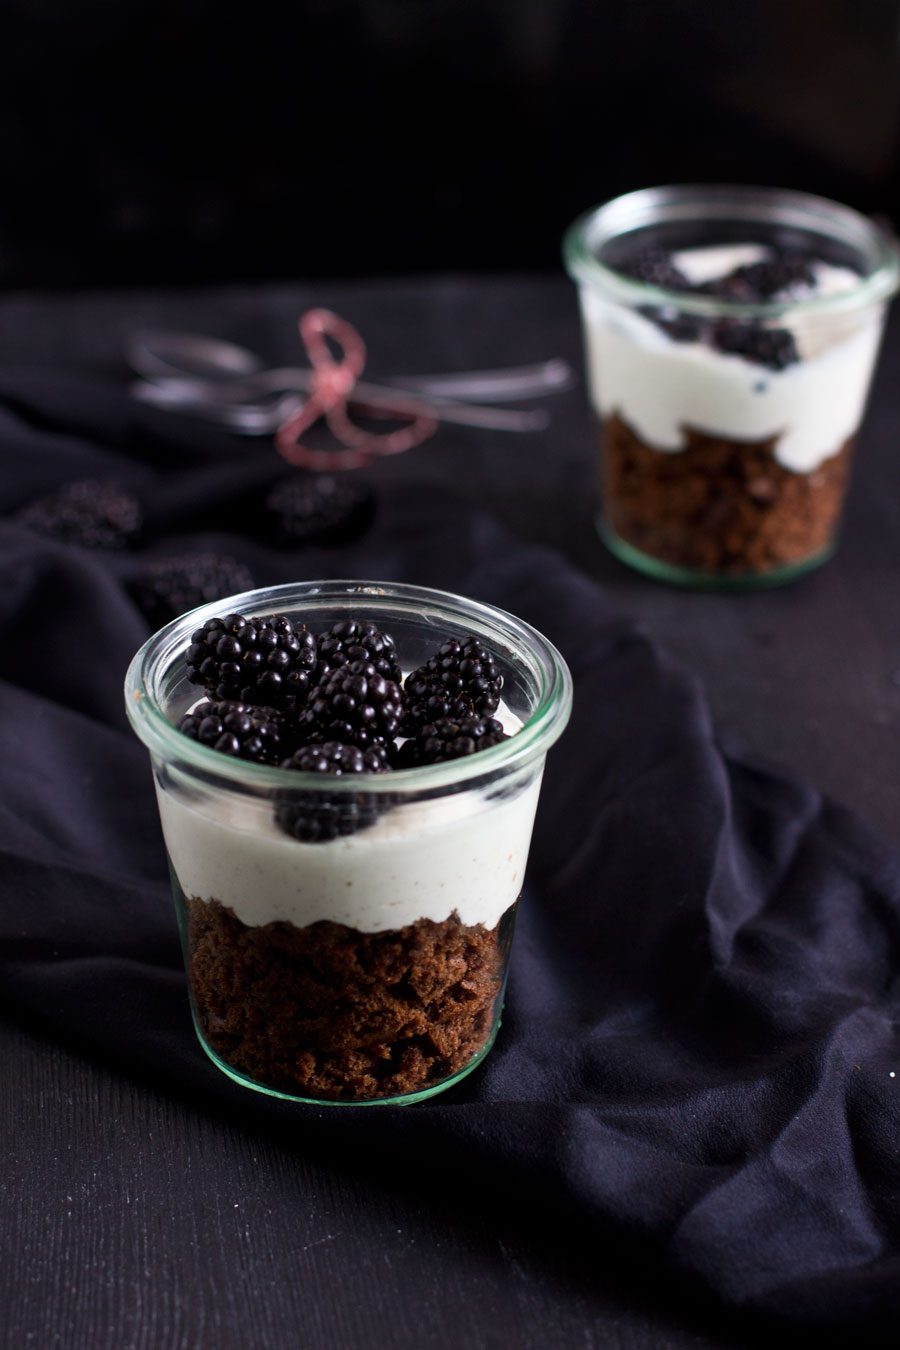 Easy summer dessert to go: chocolate cake in a jar with fresh sour cream and blackberries